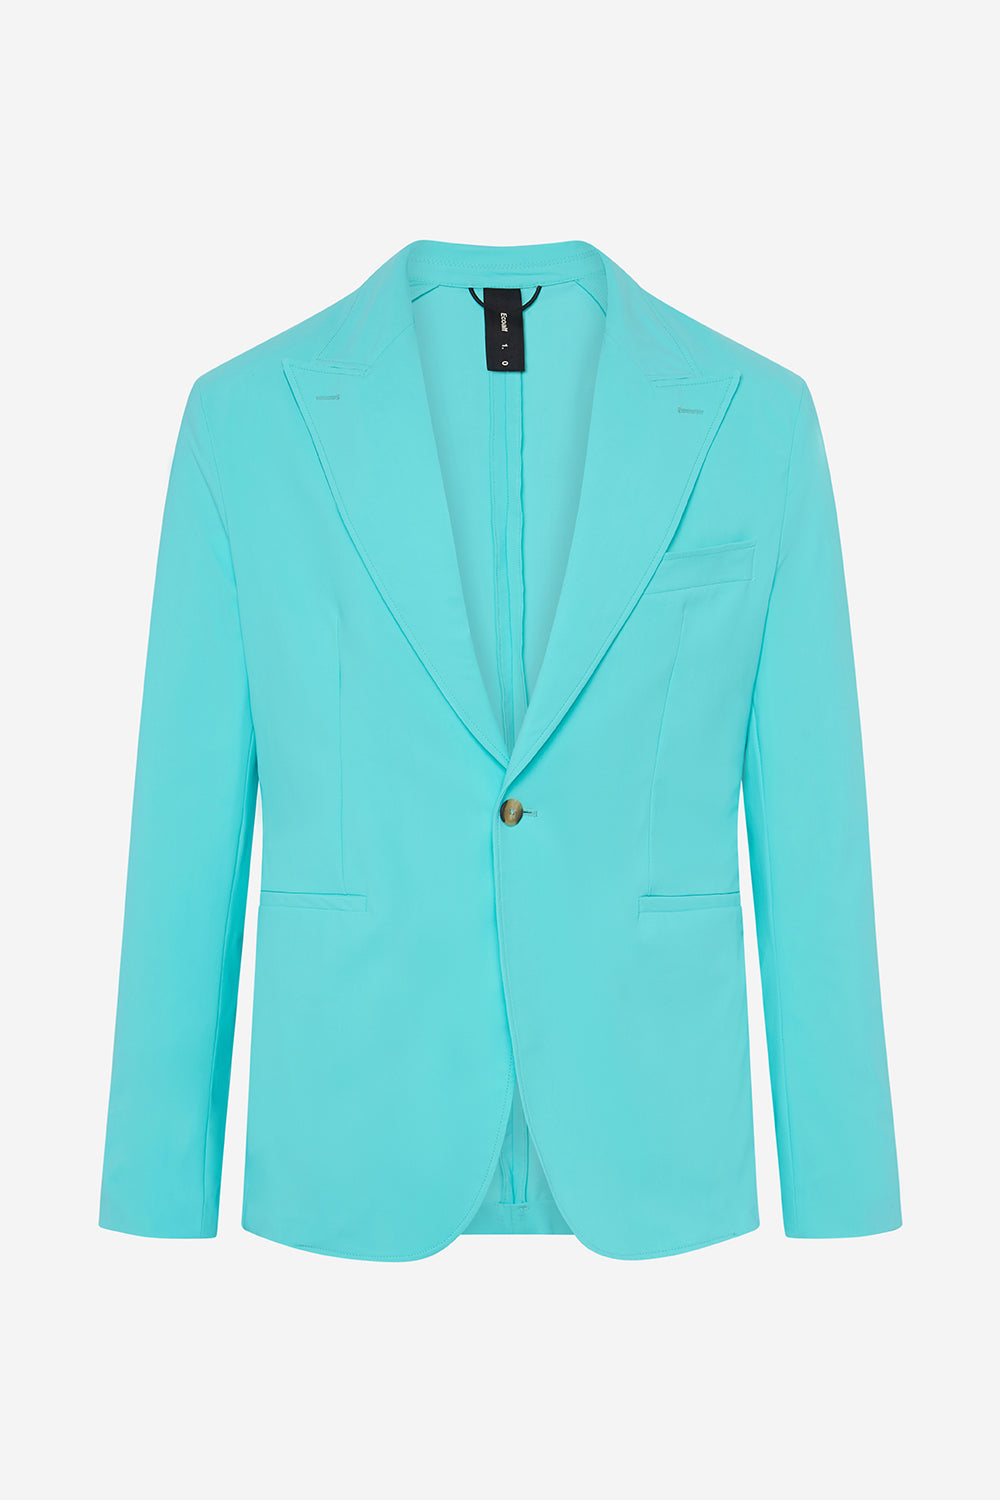 TURQUOISE JACKET SPECIAL LAPS